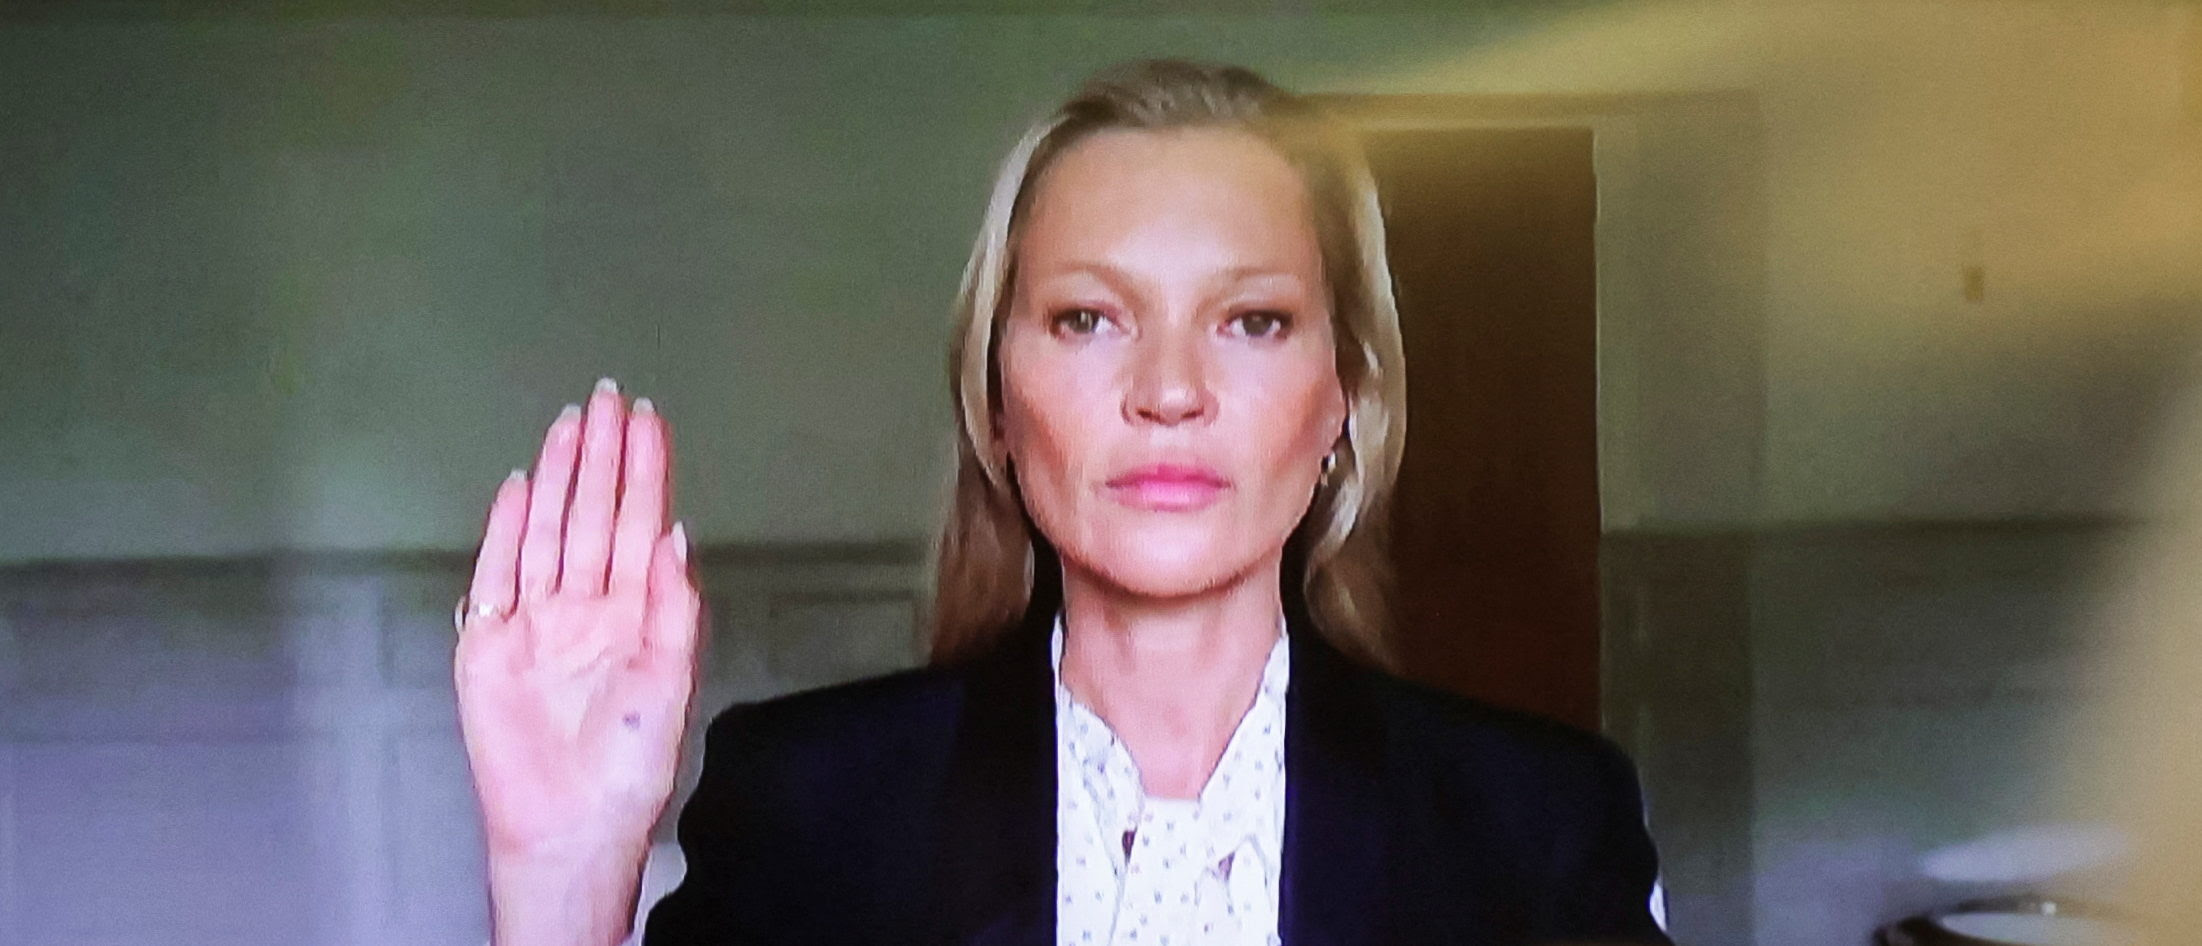 Supermodel Kate Moss Takes The Stand For Johnny Depp With Shocking Testimony